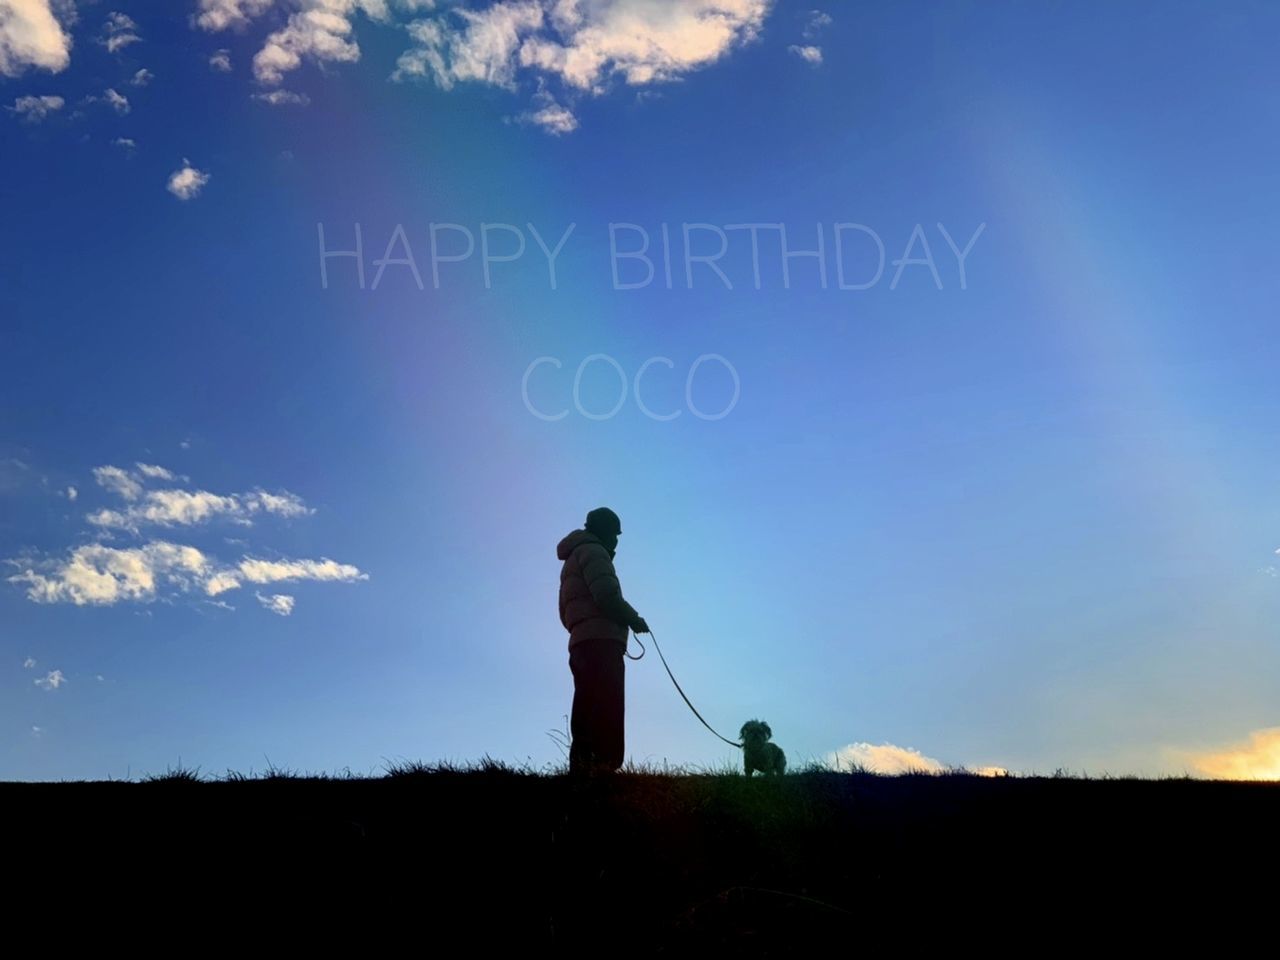 sky, horizon, cloud, sunlight, one person, morning, silhouette, standing, nature, adult, blue, men, occupation, full length, person, copy space, communication, land, outdoors